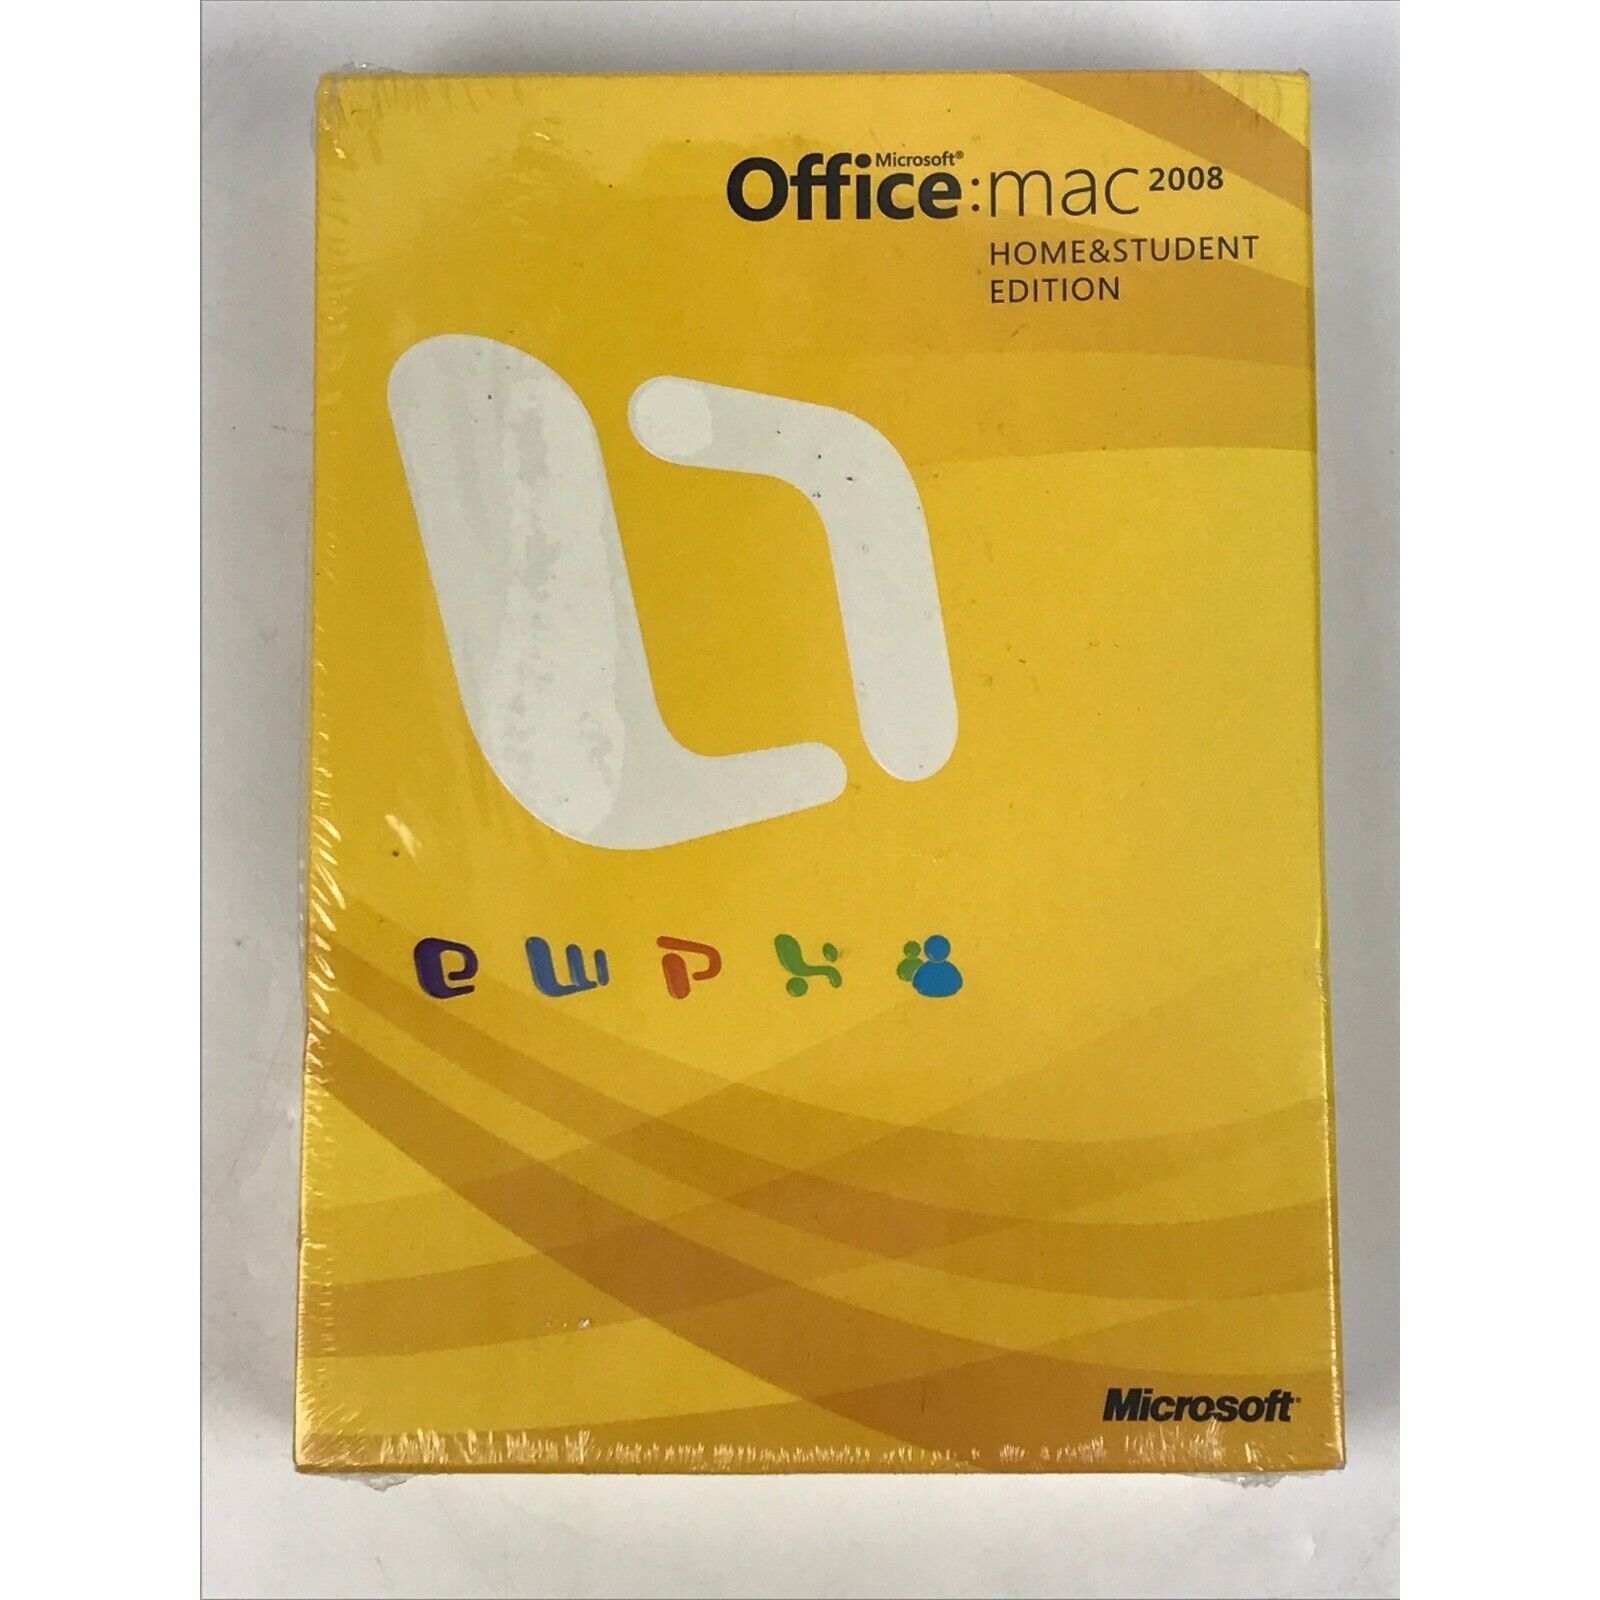 Microsoft MS Office Mac 2008 Home Student Edition - New Factory Sealed